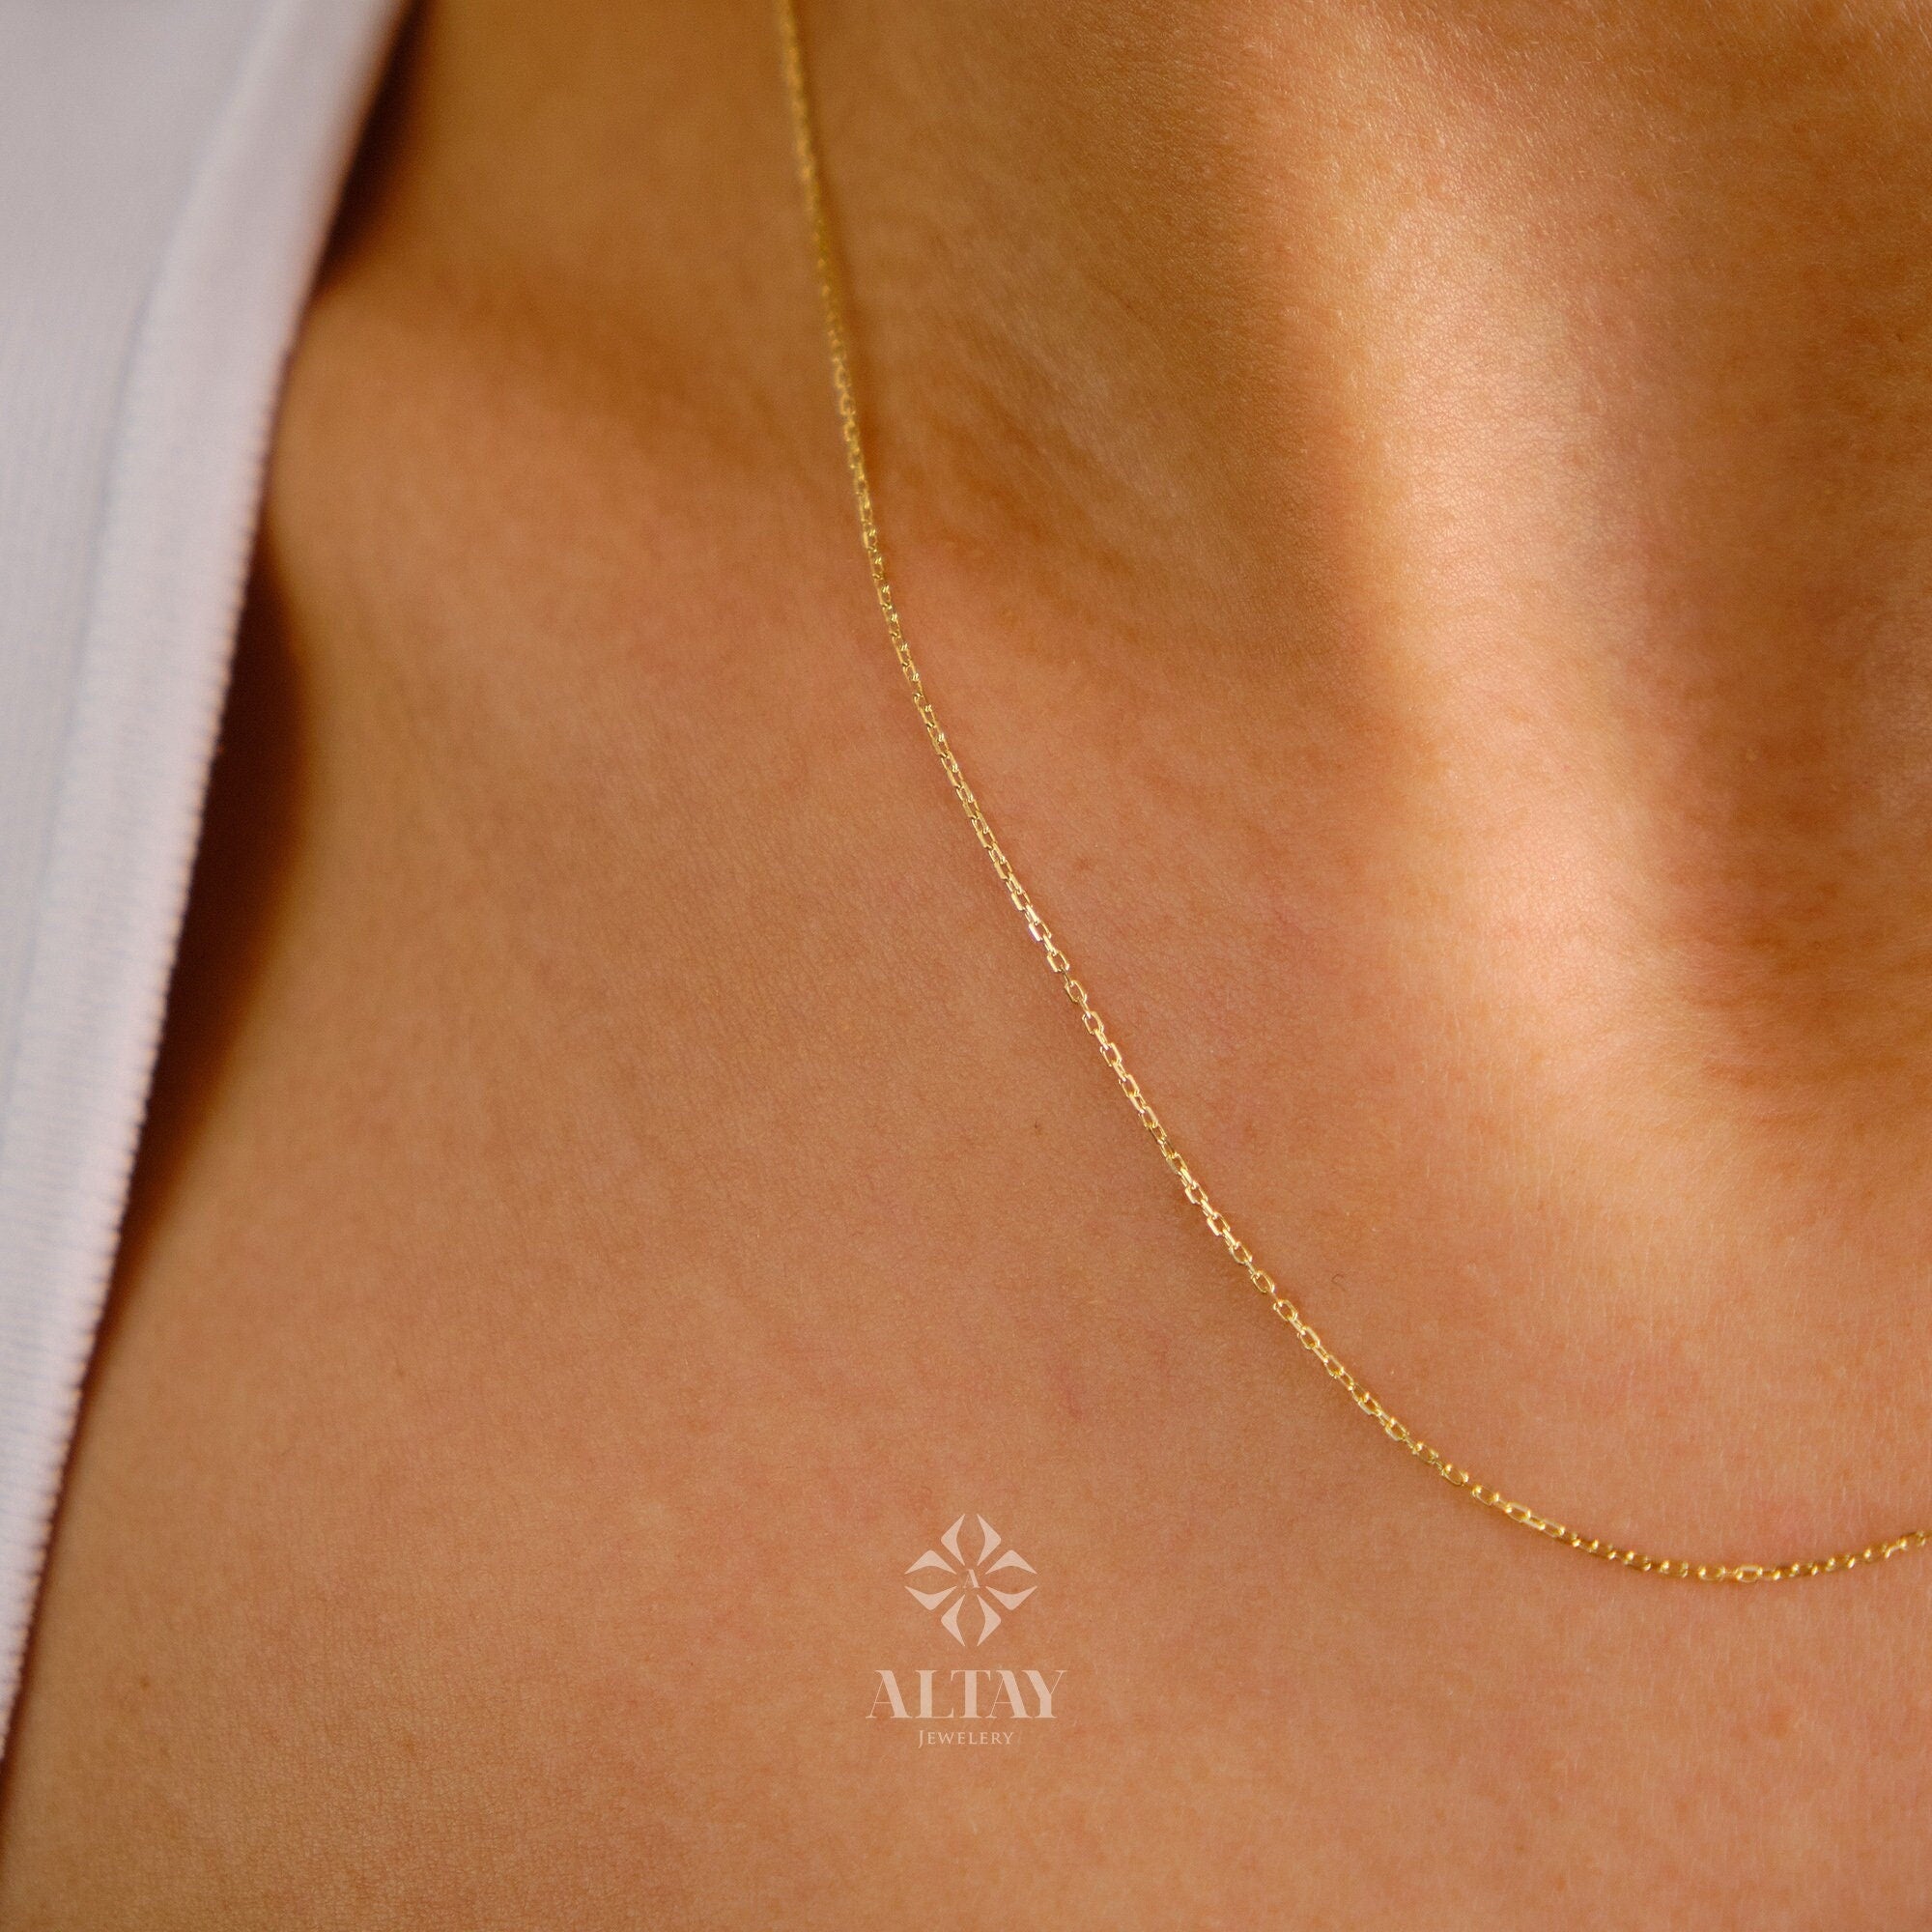 14K Gold Chain Necklace, 1.1mm Cable Chain, Long Gold Chain Necklace, Gold Delicate Choker, Layering Thin Chain, Simple Dainty Necklace